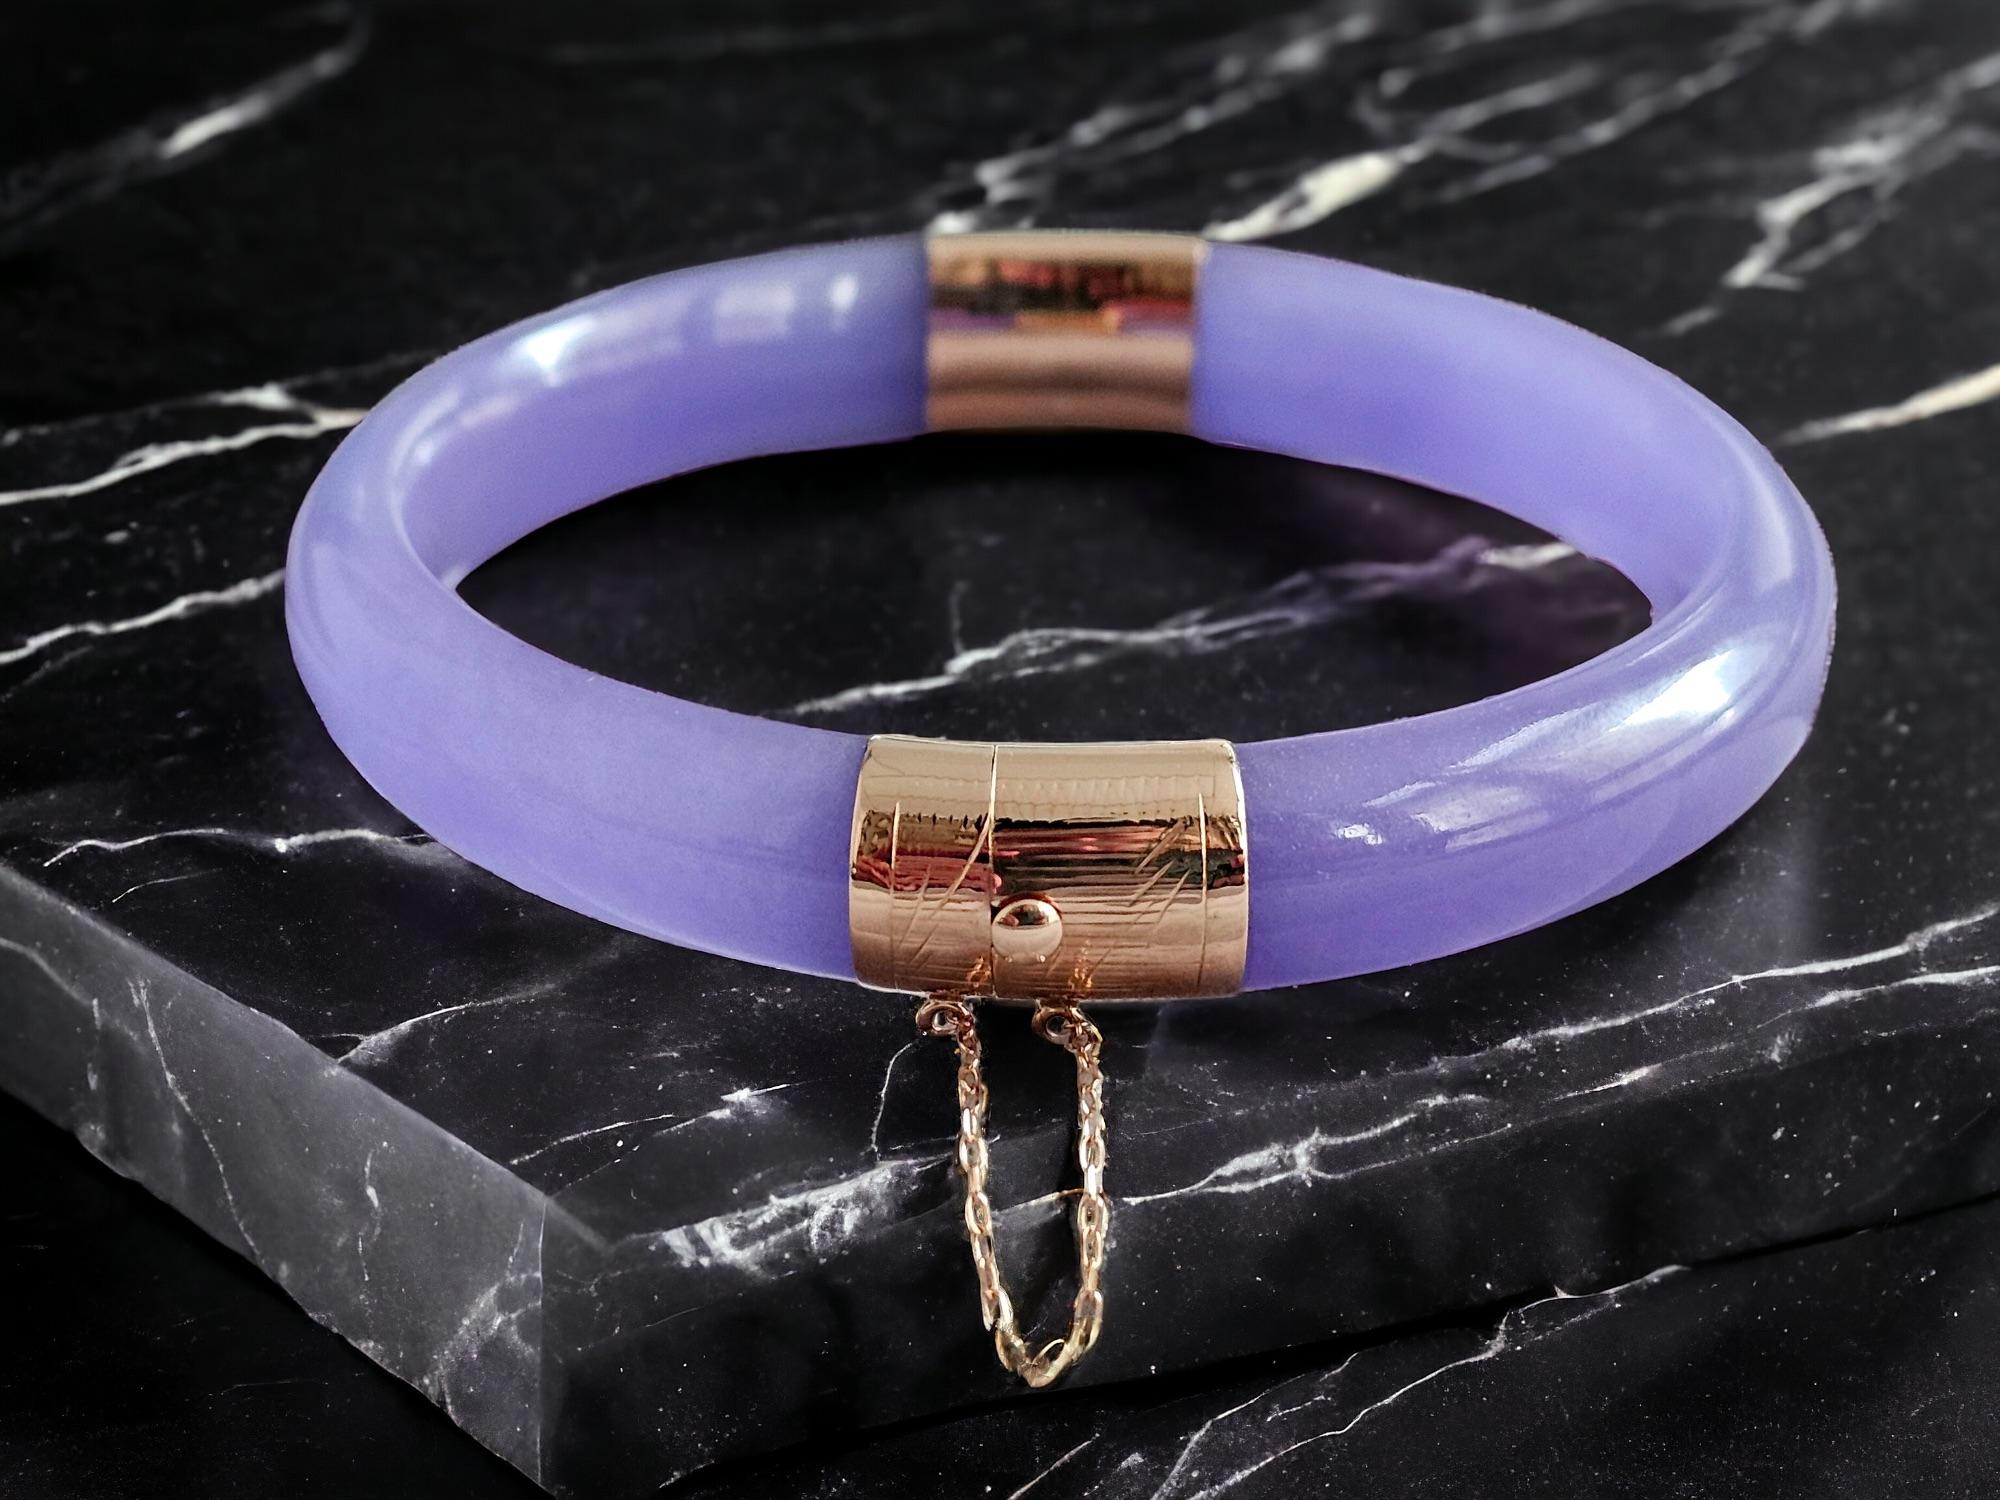 Women's or Men's Viceroy's Circular Lavender Jade Bangle Bracelet (with 14K Yellow Gold) For Sale